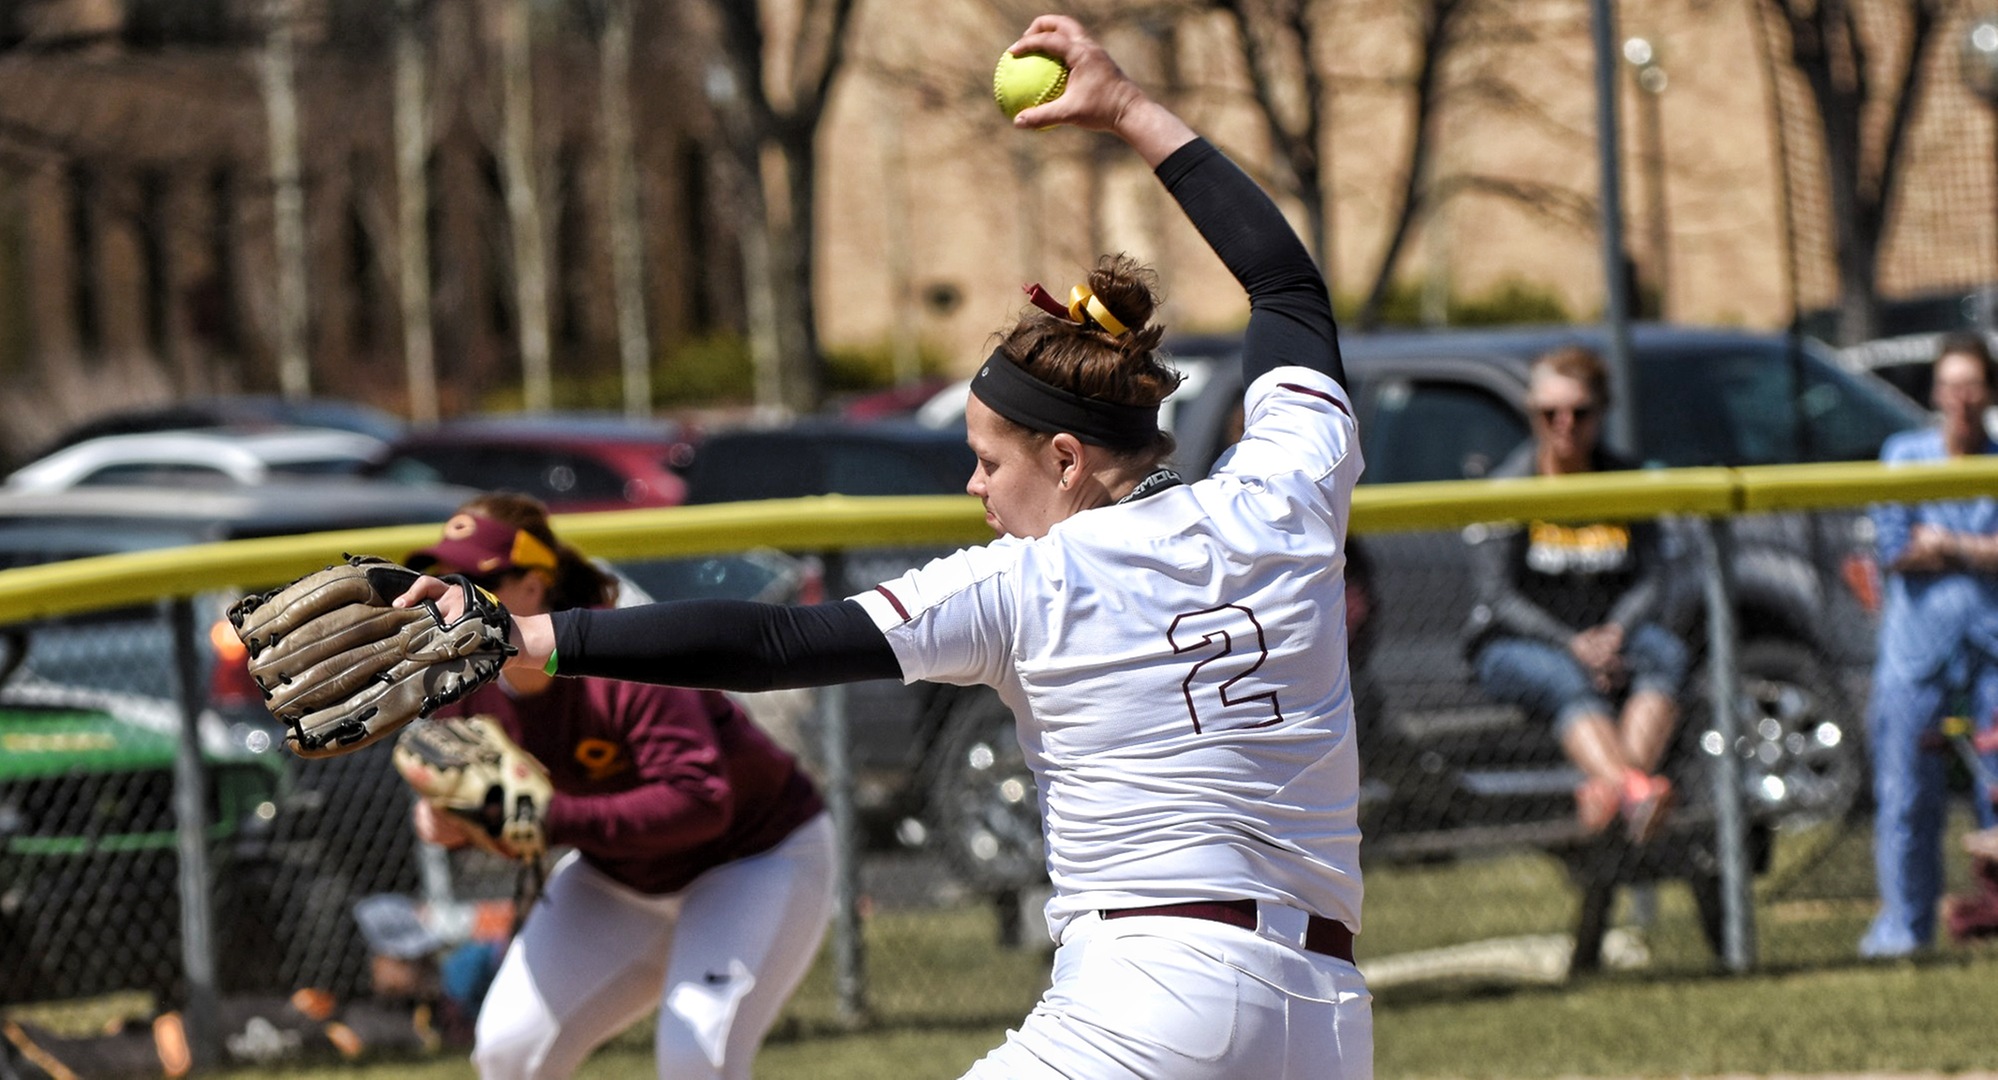 Senior Abby Haraldson delivers a strike during the Cobbers' first game with Augsburg. She recorded eight K's in the game.